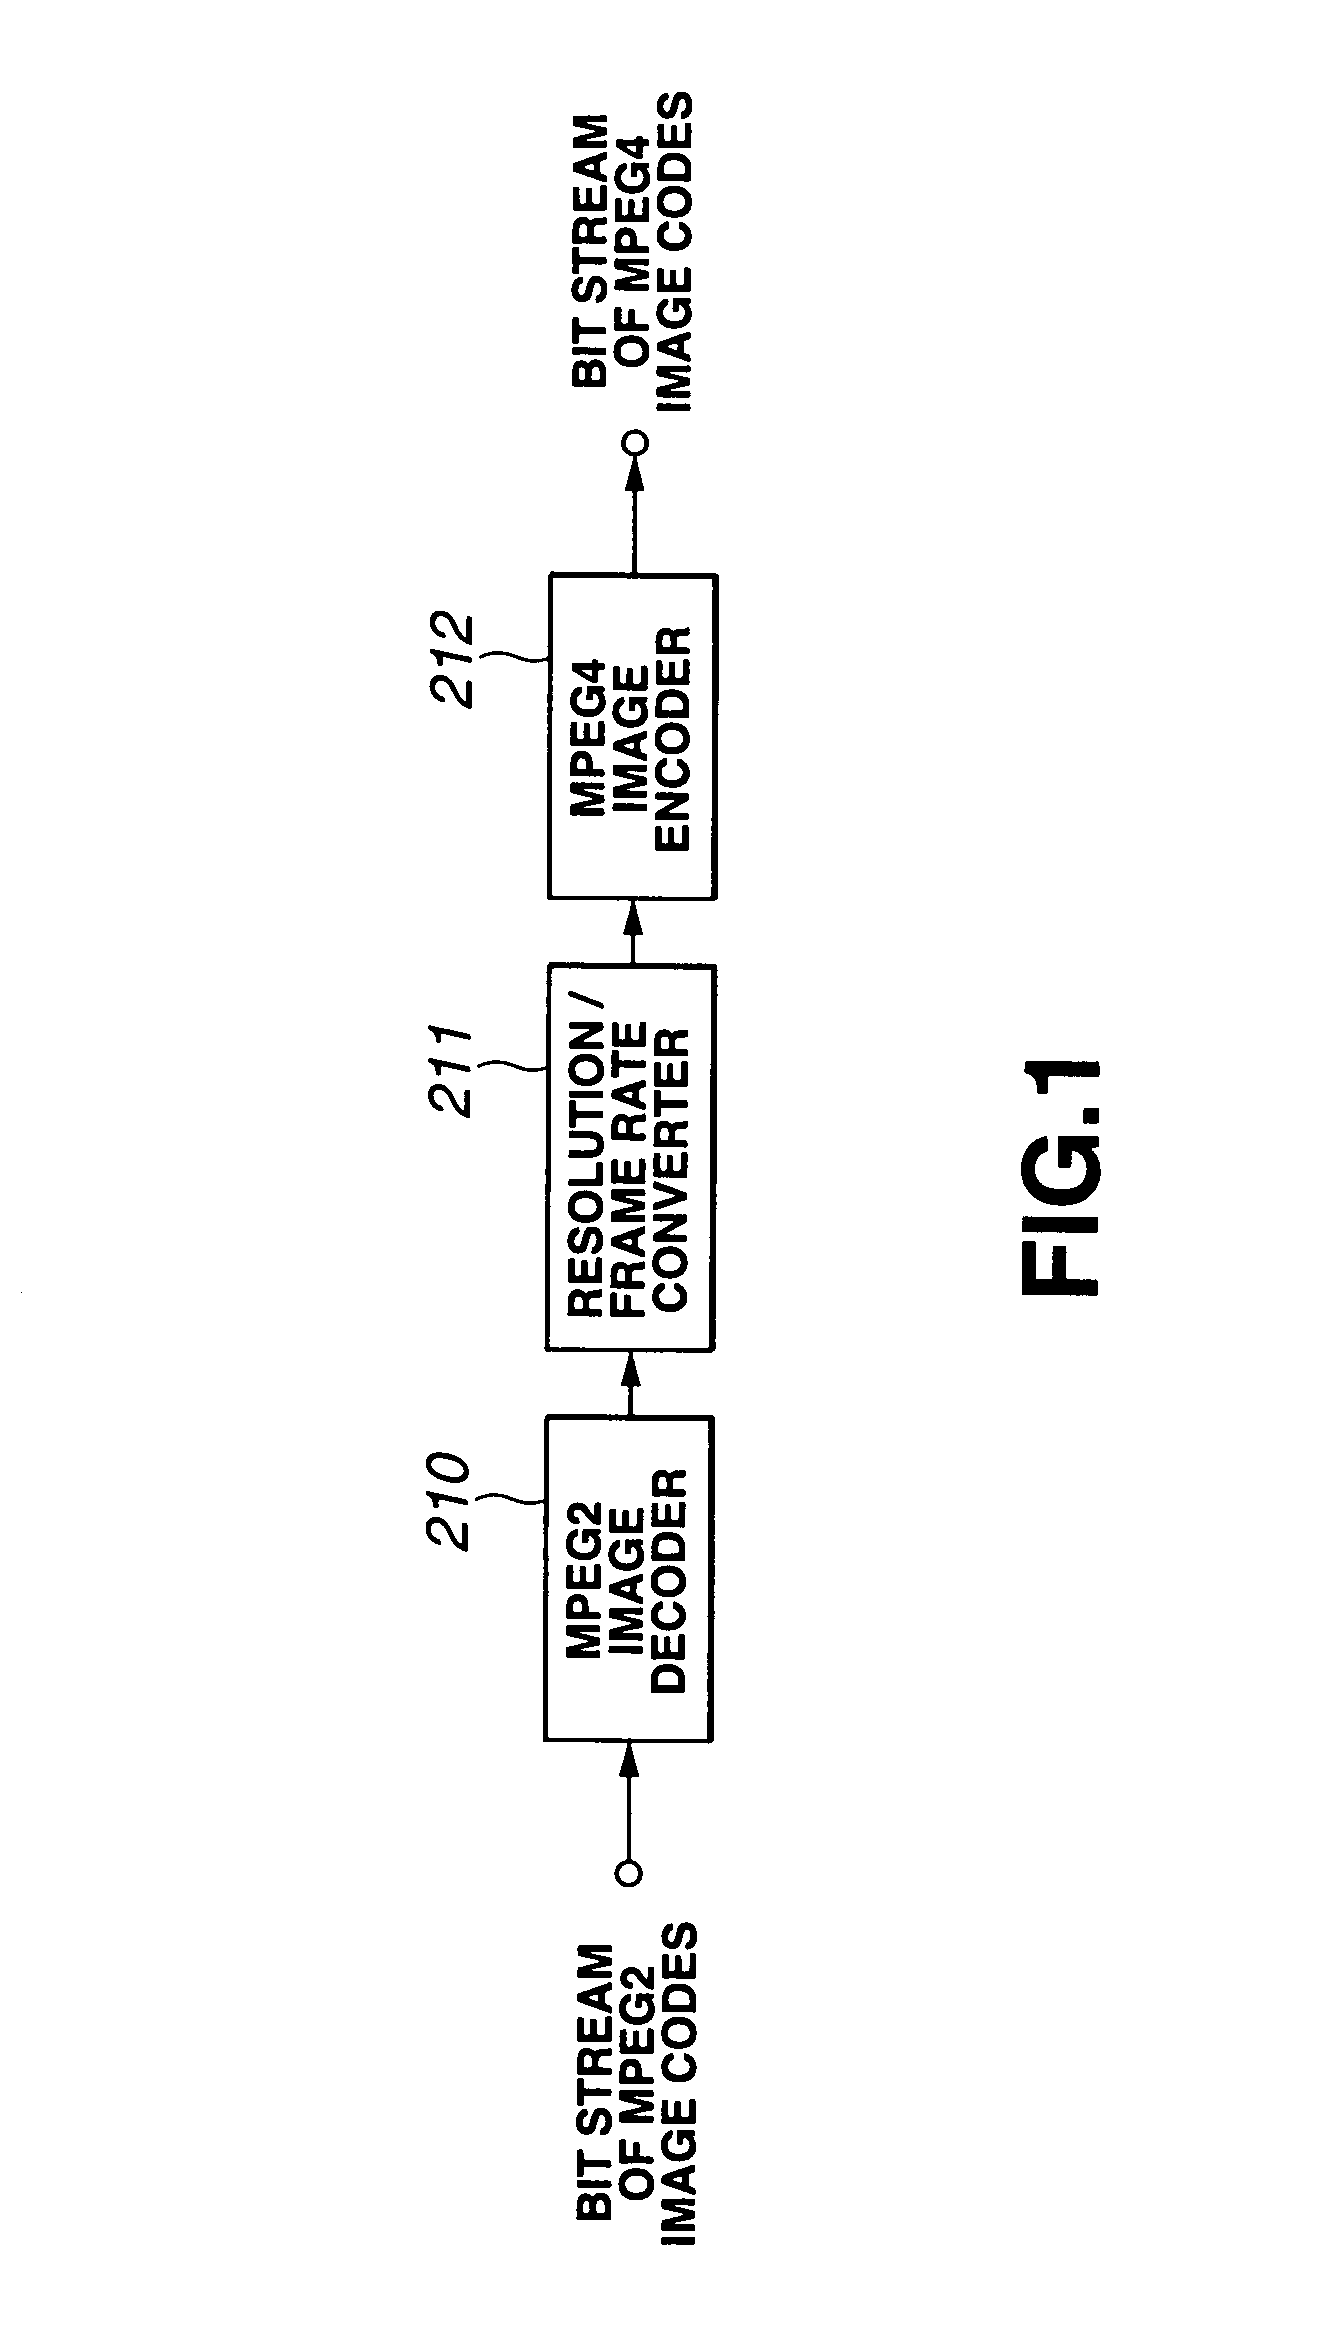 Apparatus and method for converting signals